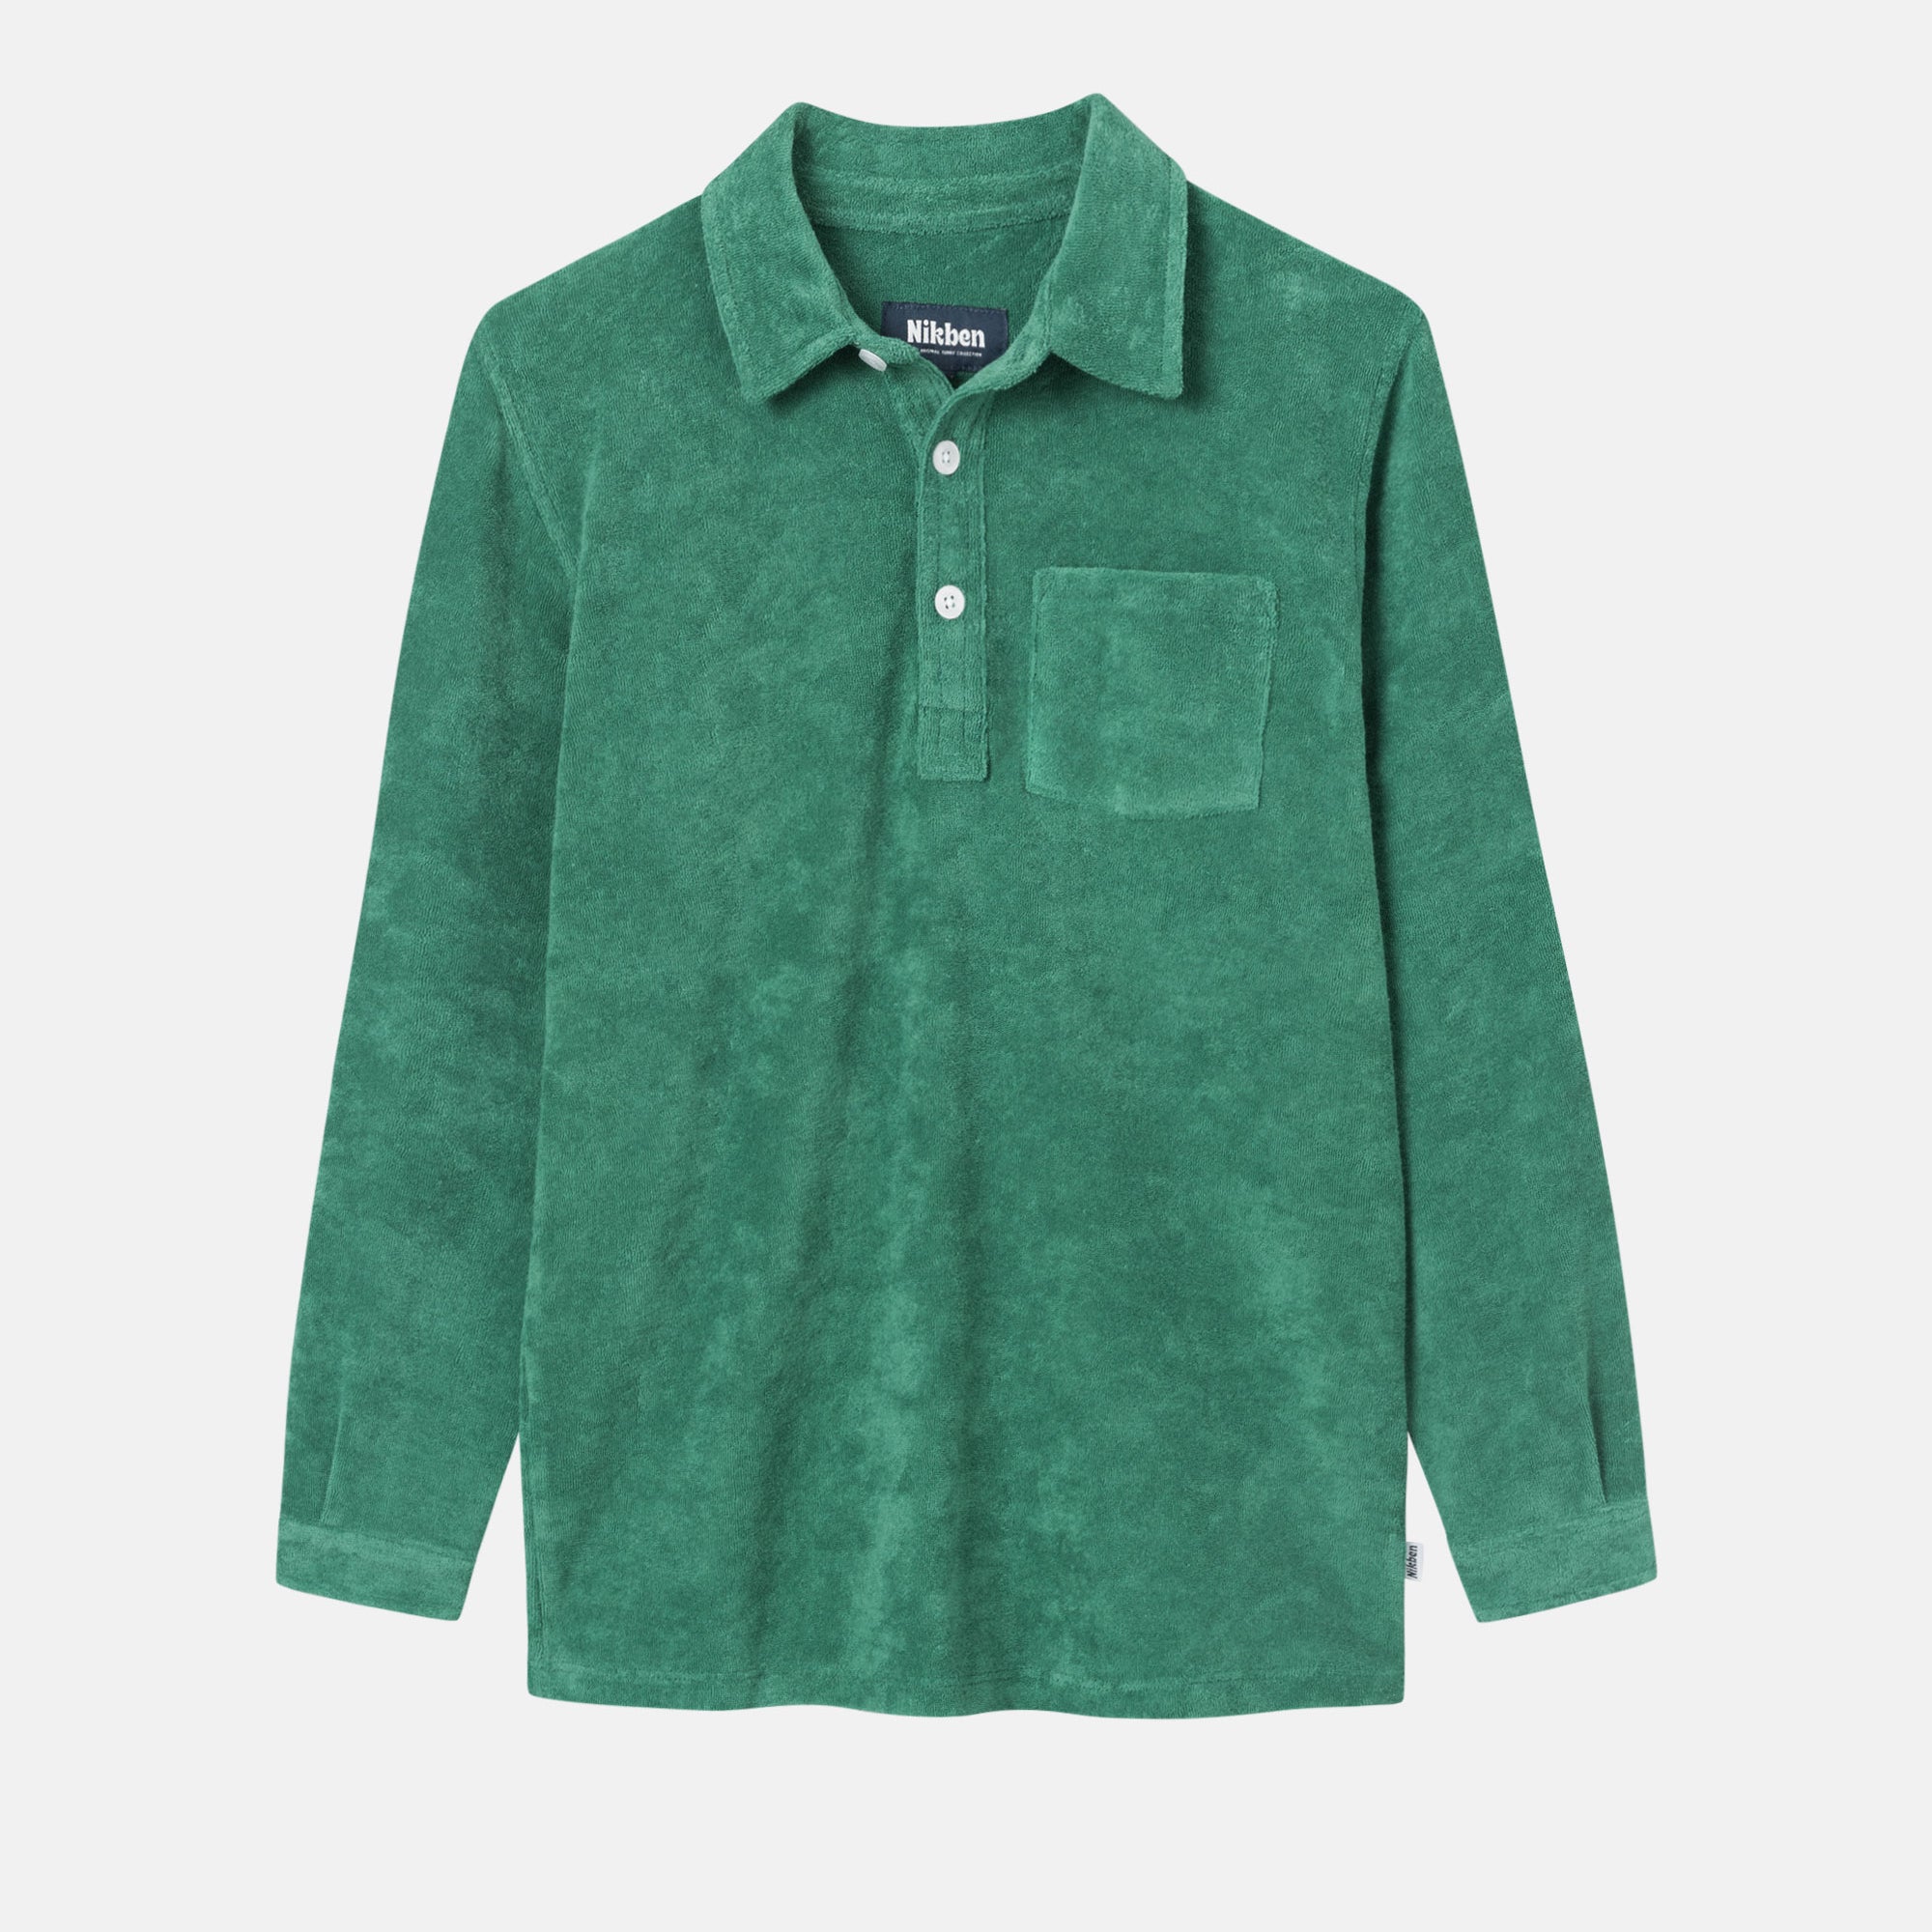 Green long sleeve shirt in terry toweling fabric for kids with half button closure and one chest pocket